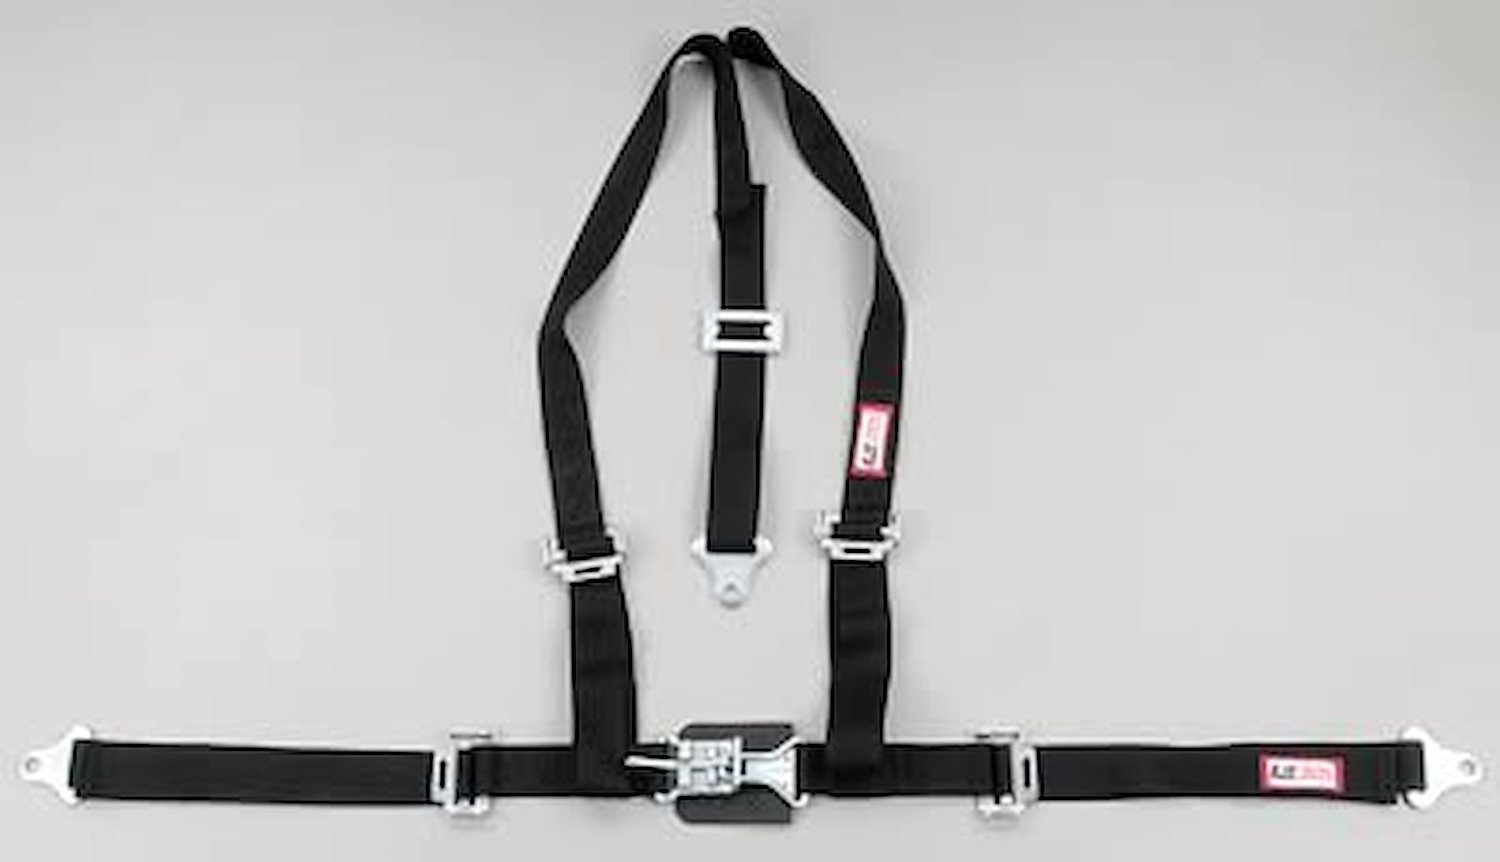 NON-SFI L&L HARNESS 2 PULL DOWN Lap Belt SNAP SEWN IN 2 S.H. Individual ROLL BAR Mount w/STERNUM STRAP WRAP/SNAP GRAY